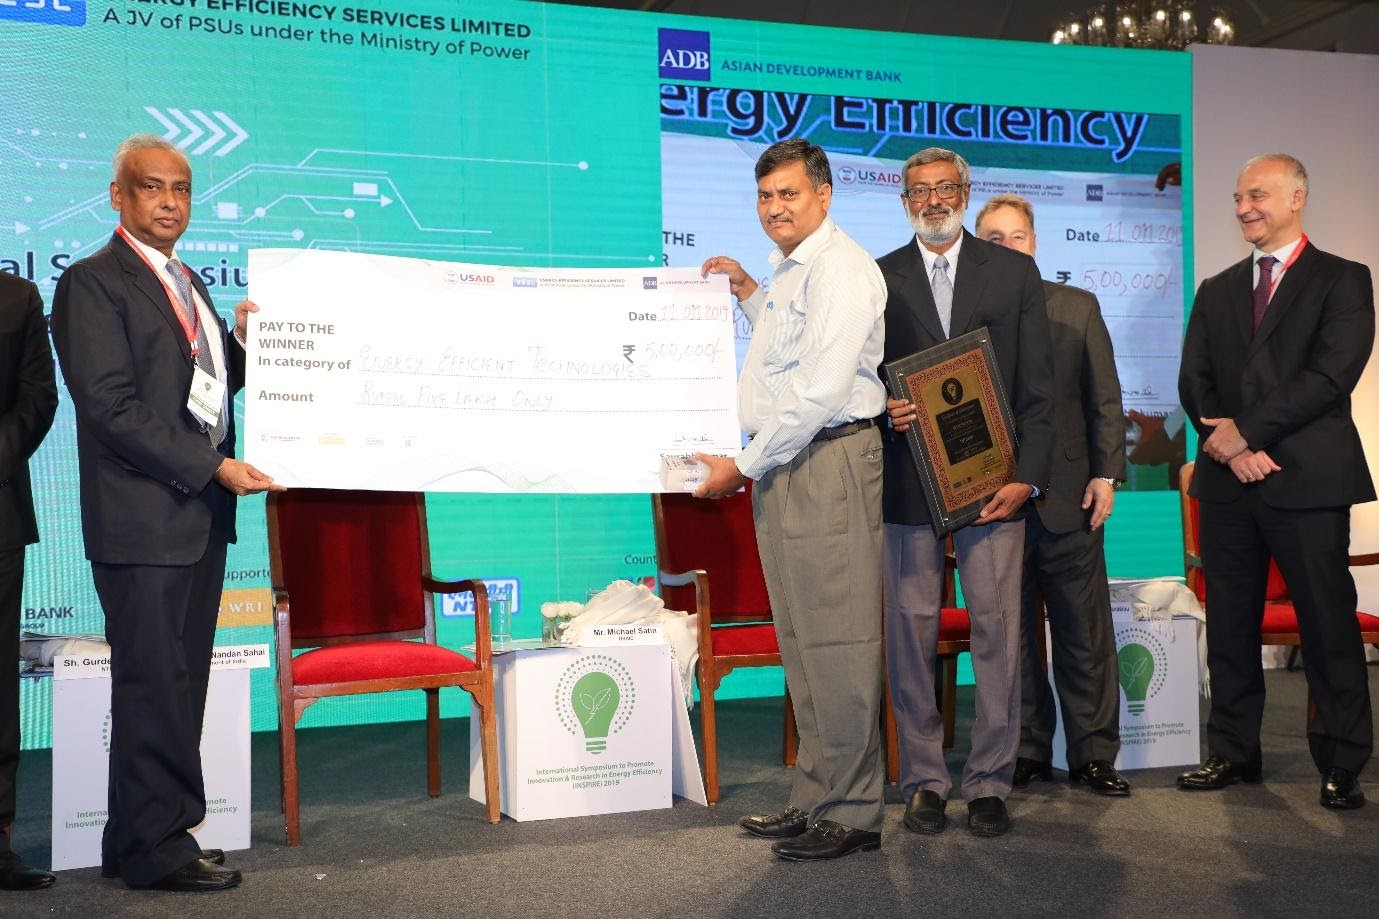 1st Prize in Energy Efficiency Category with 5 lakhs cash reward of innovate-To-Inspire completion by Energy Efficiency services Ltd (EESL), World Bank, ADB, IFC, DOE (USA), WRI